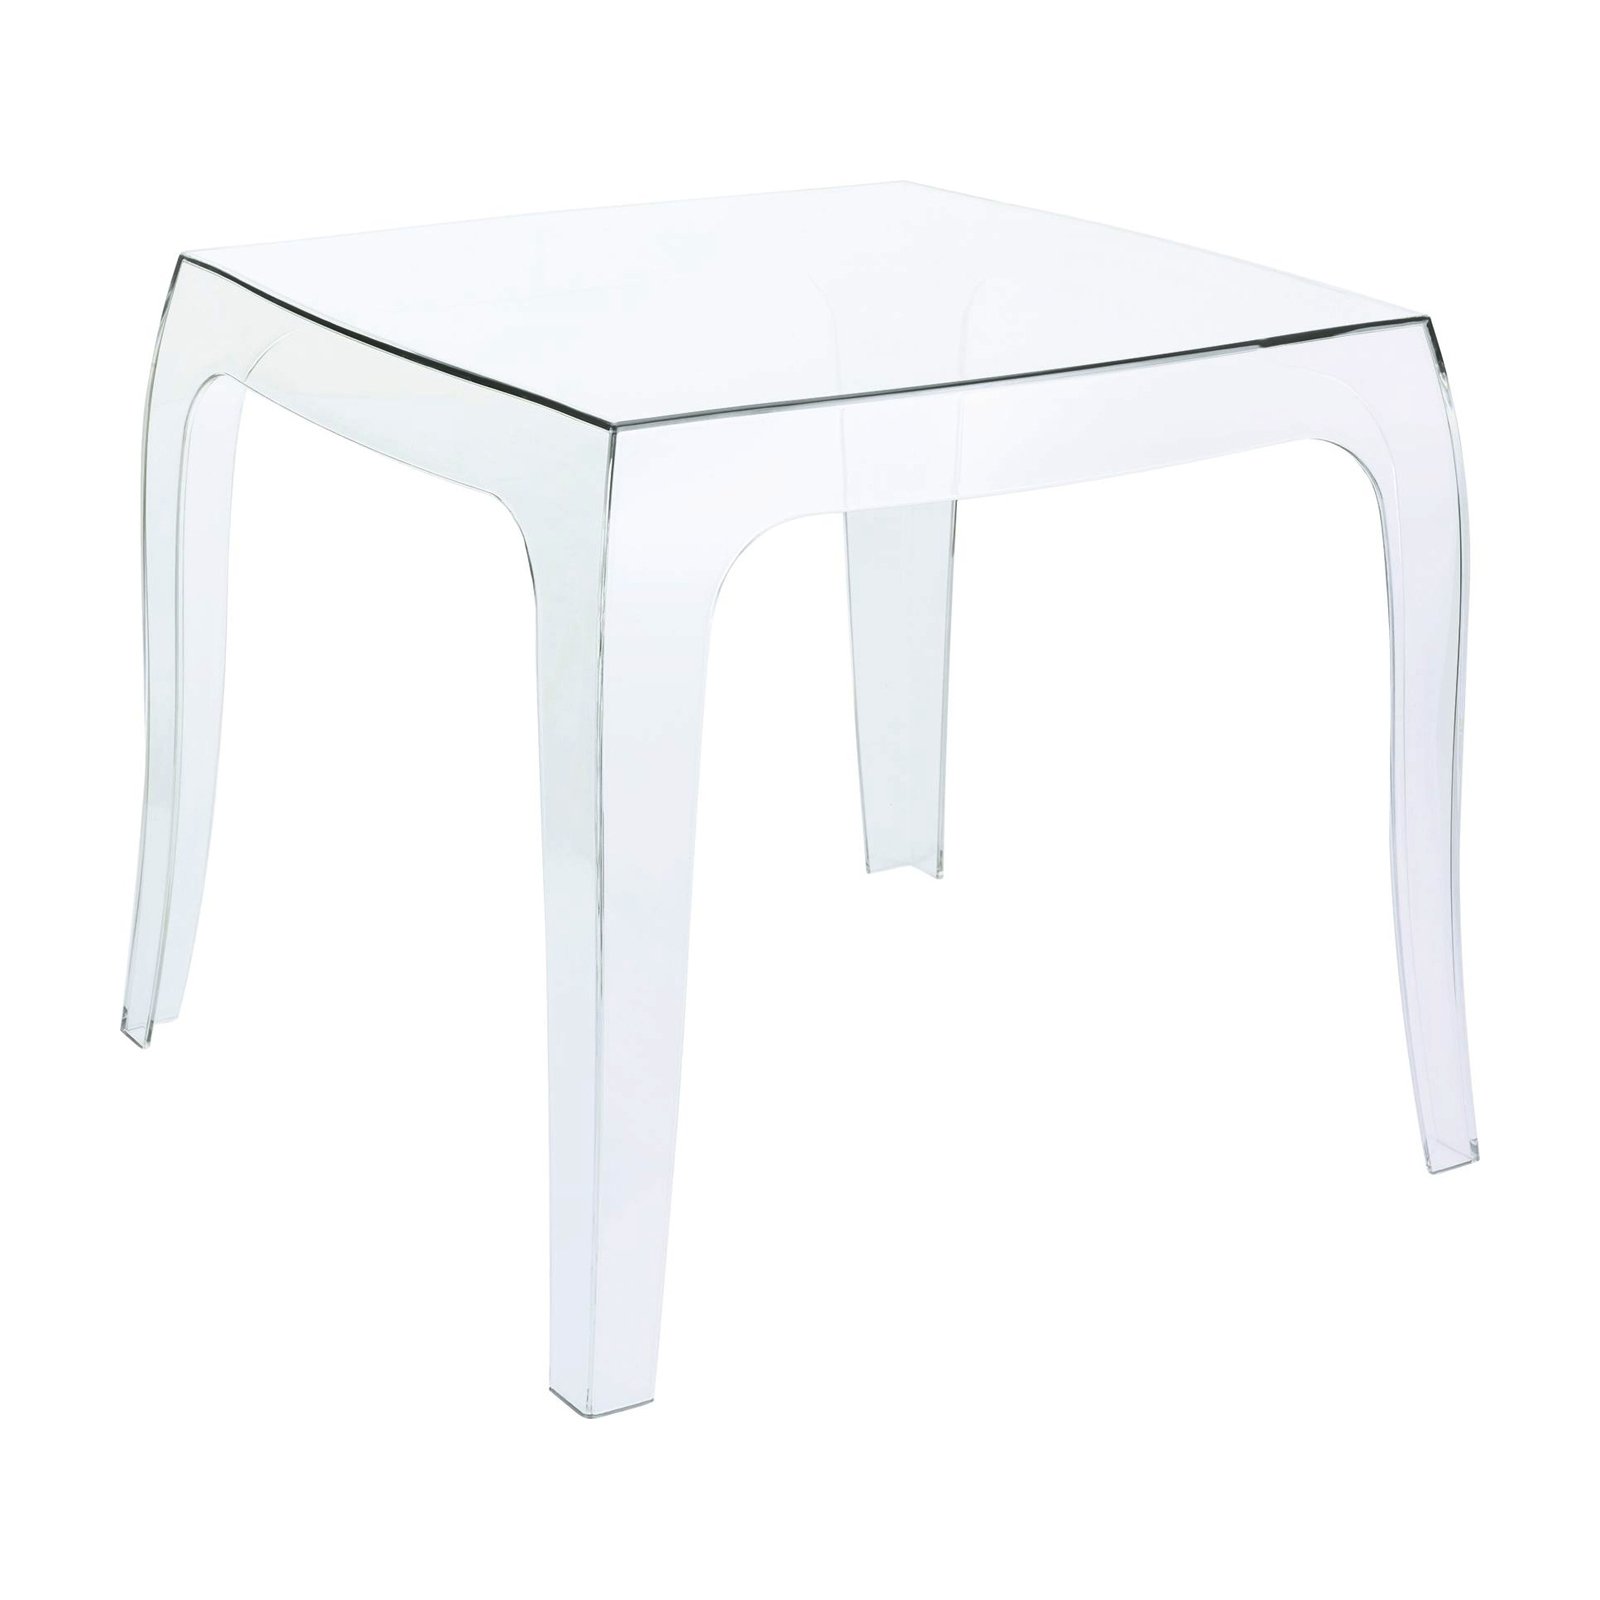 Compamia Queen Polycarbonate Patio Side Table in Transparent Clear - image 1 of 2